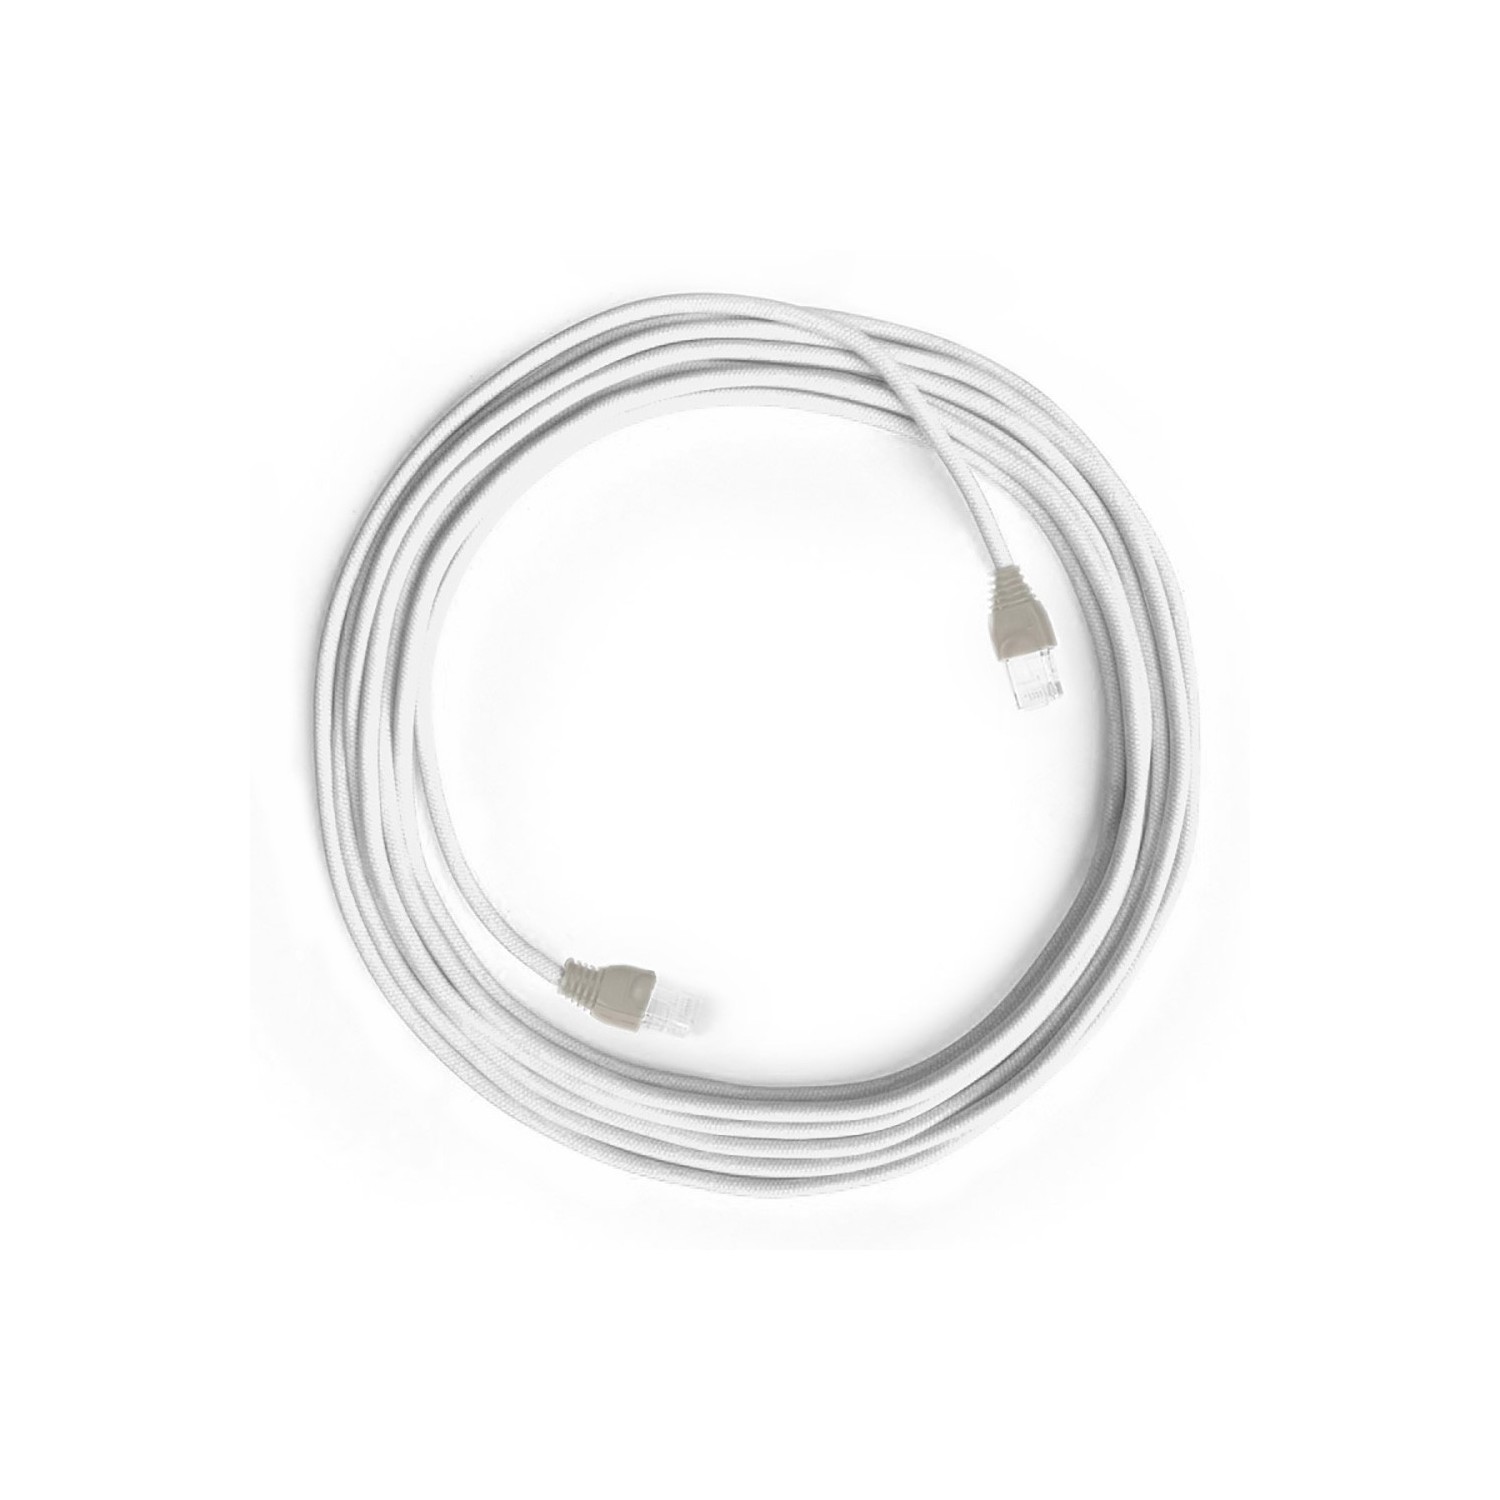 LAN Ethernet Cable Cat 5e with RJ45 plugs - Cotton Fabric RC01 White